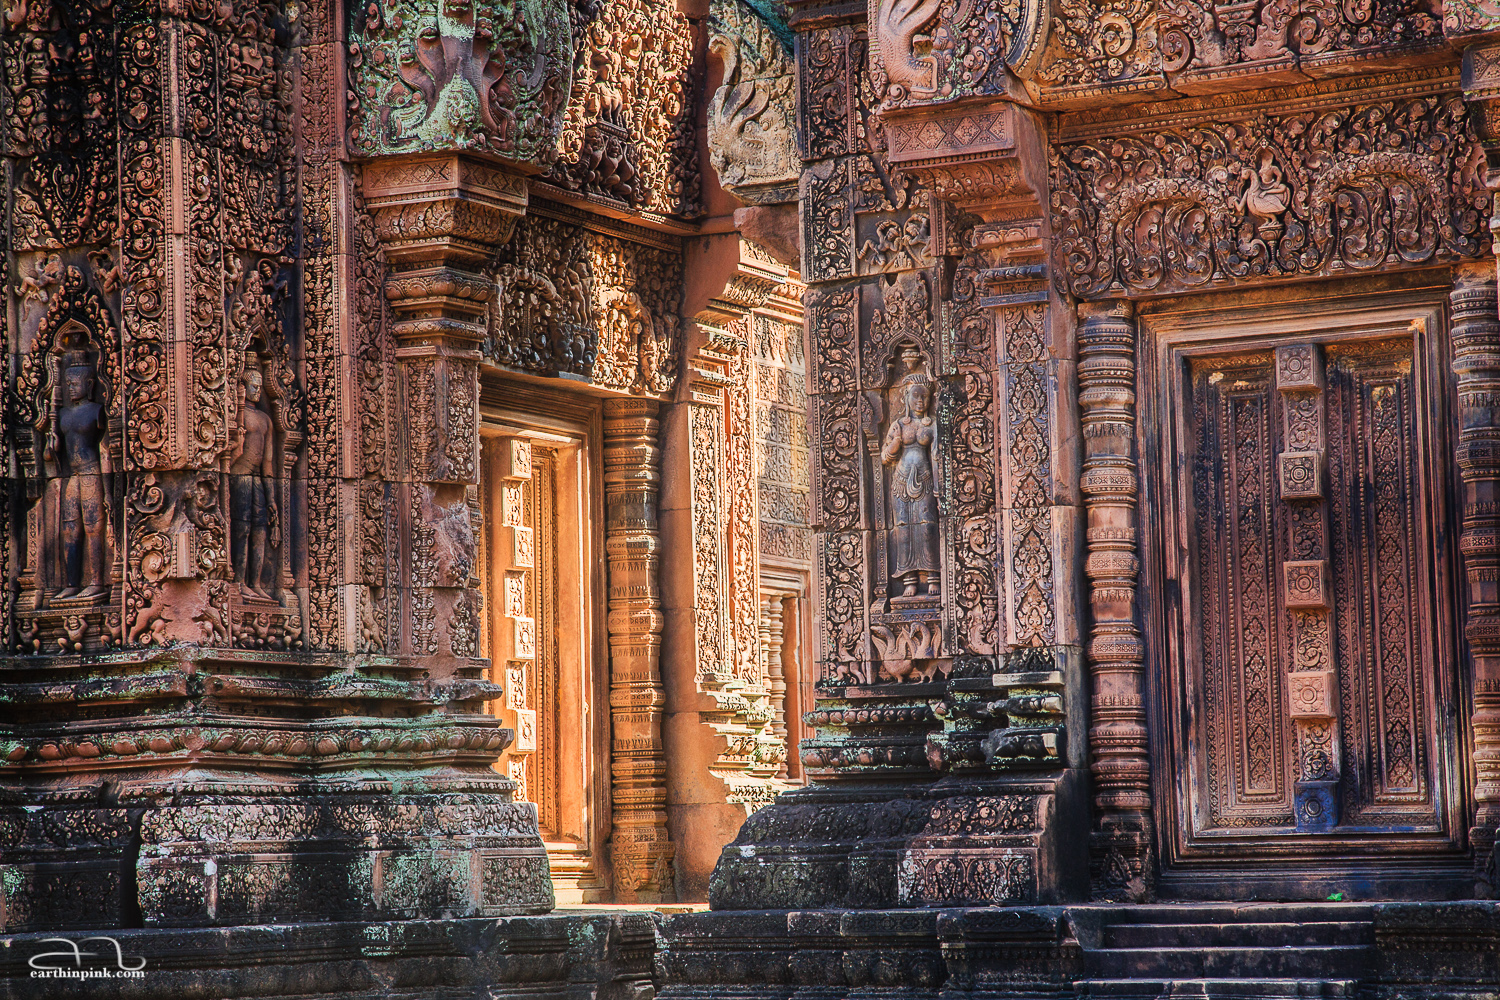 Intricate, delicate carvings of Banteay Srei in the morning light.